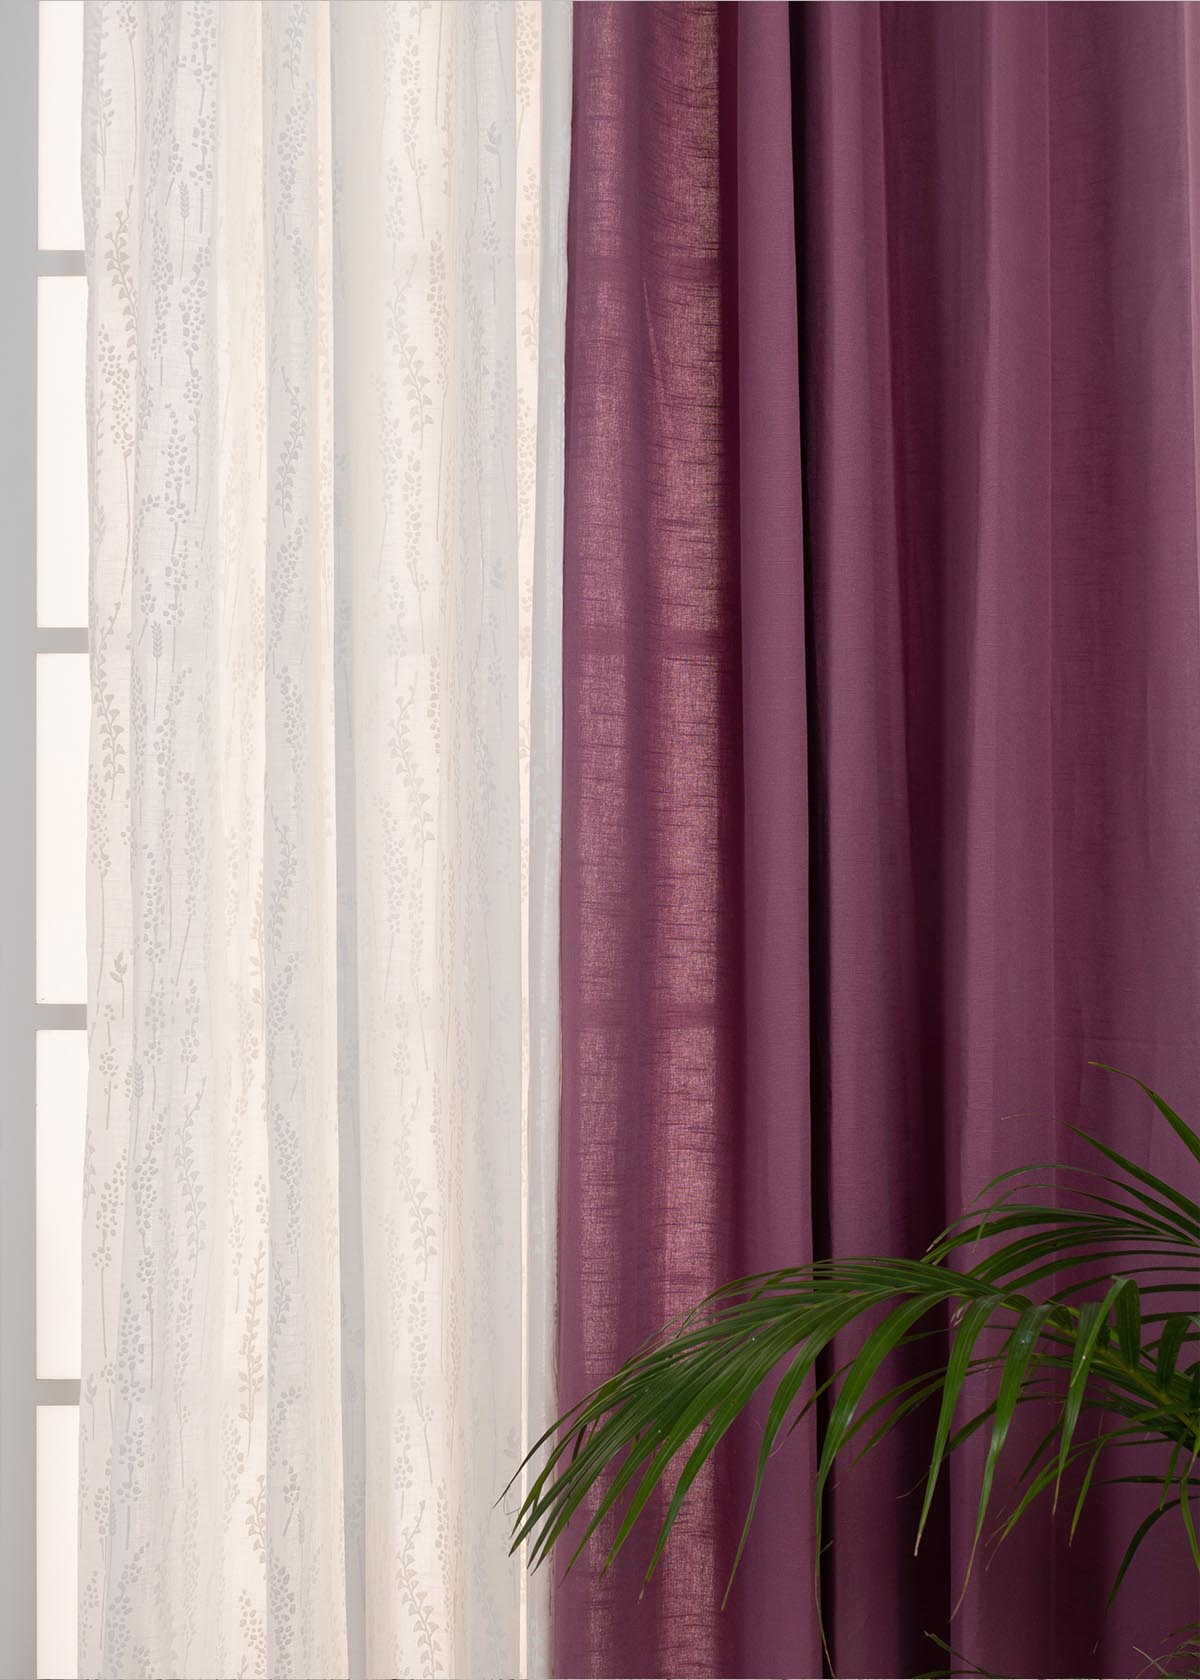 Grape Solid, Grass Fields In White Sheer Set of 4 Combo Cotton Curtain - Grape White